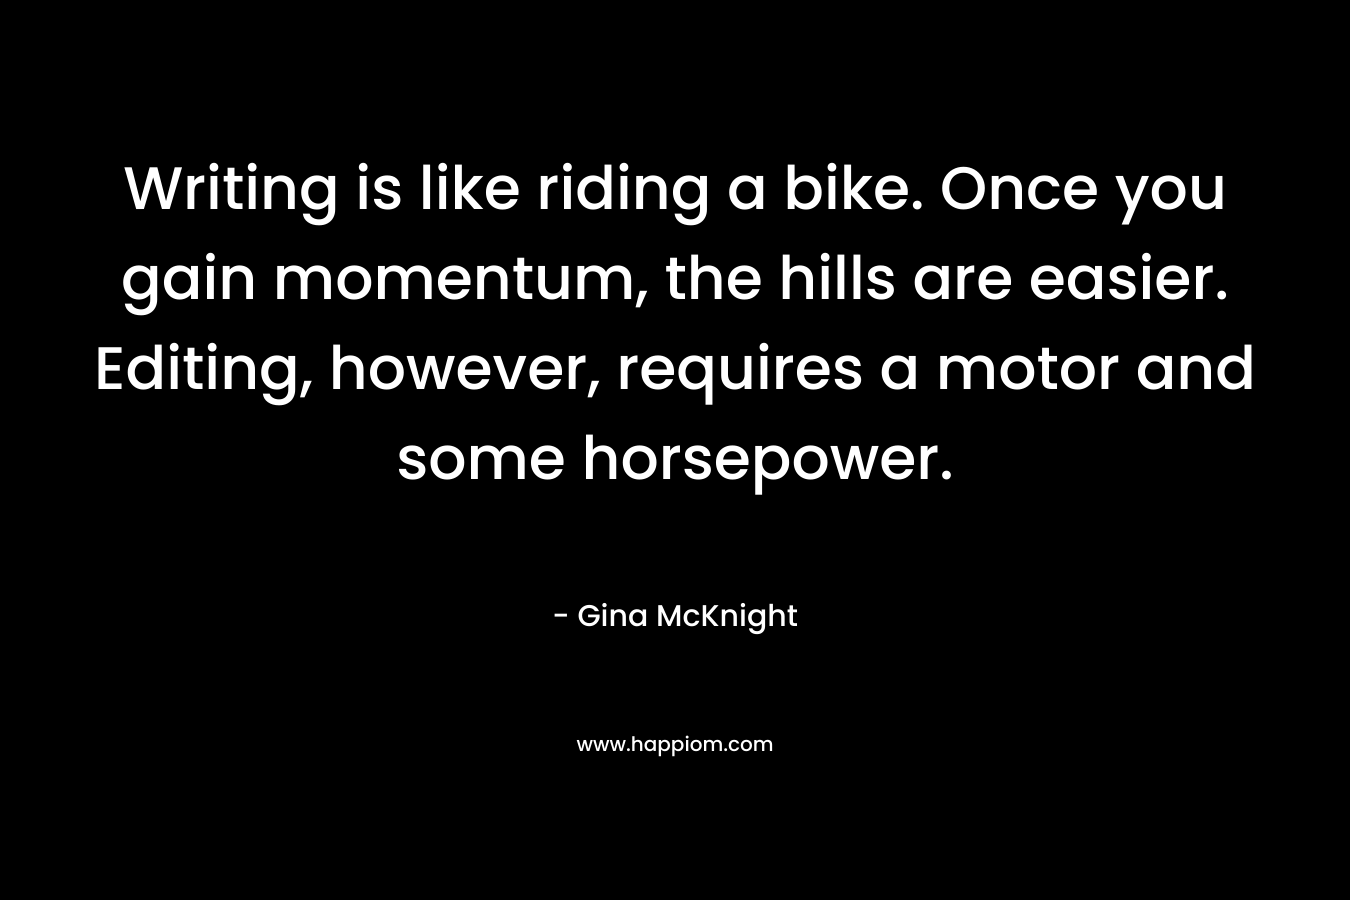 Writing is like riding a bike. Once you gain momentum, the hills are easier. Editing, however, requires a motor and some horsepower.